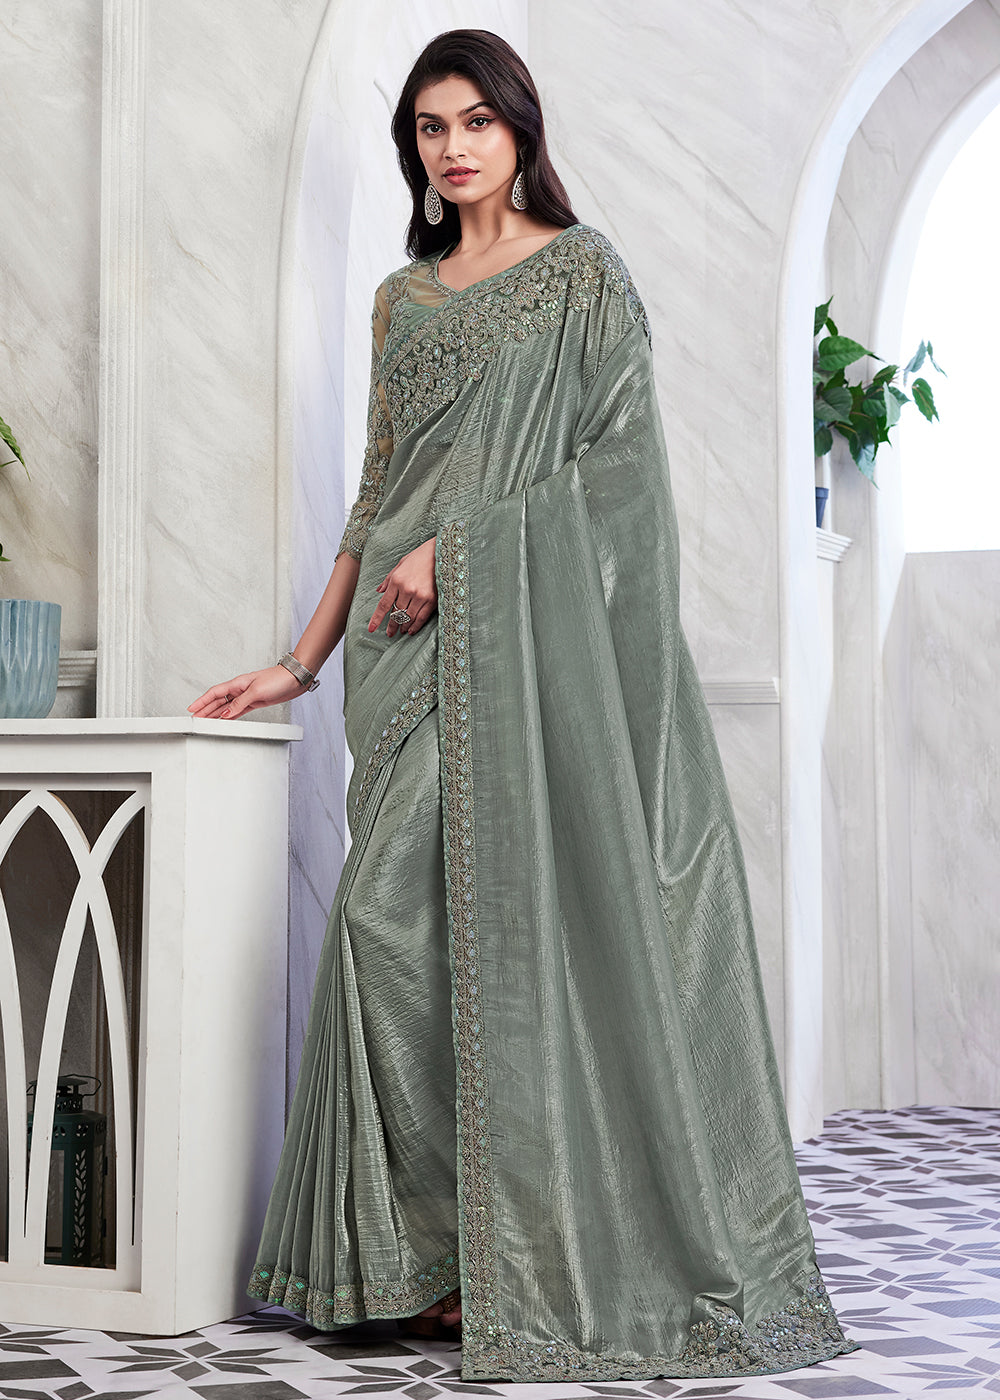 Buy Now Lovely Greenish Grey Silk Embroidered Designer Saree Online in USA, UK, Canada & Worldwide at Empress Clothing. 